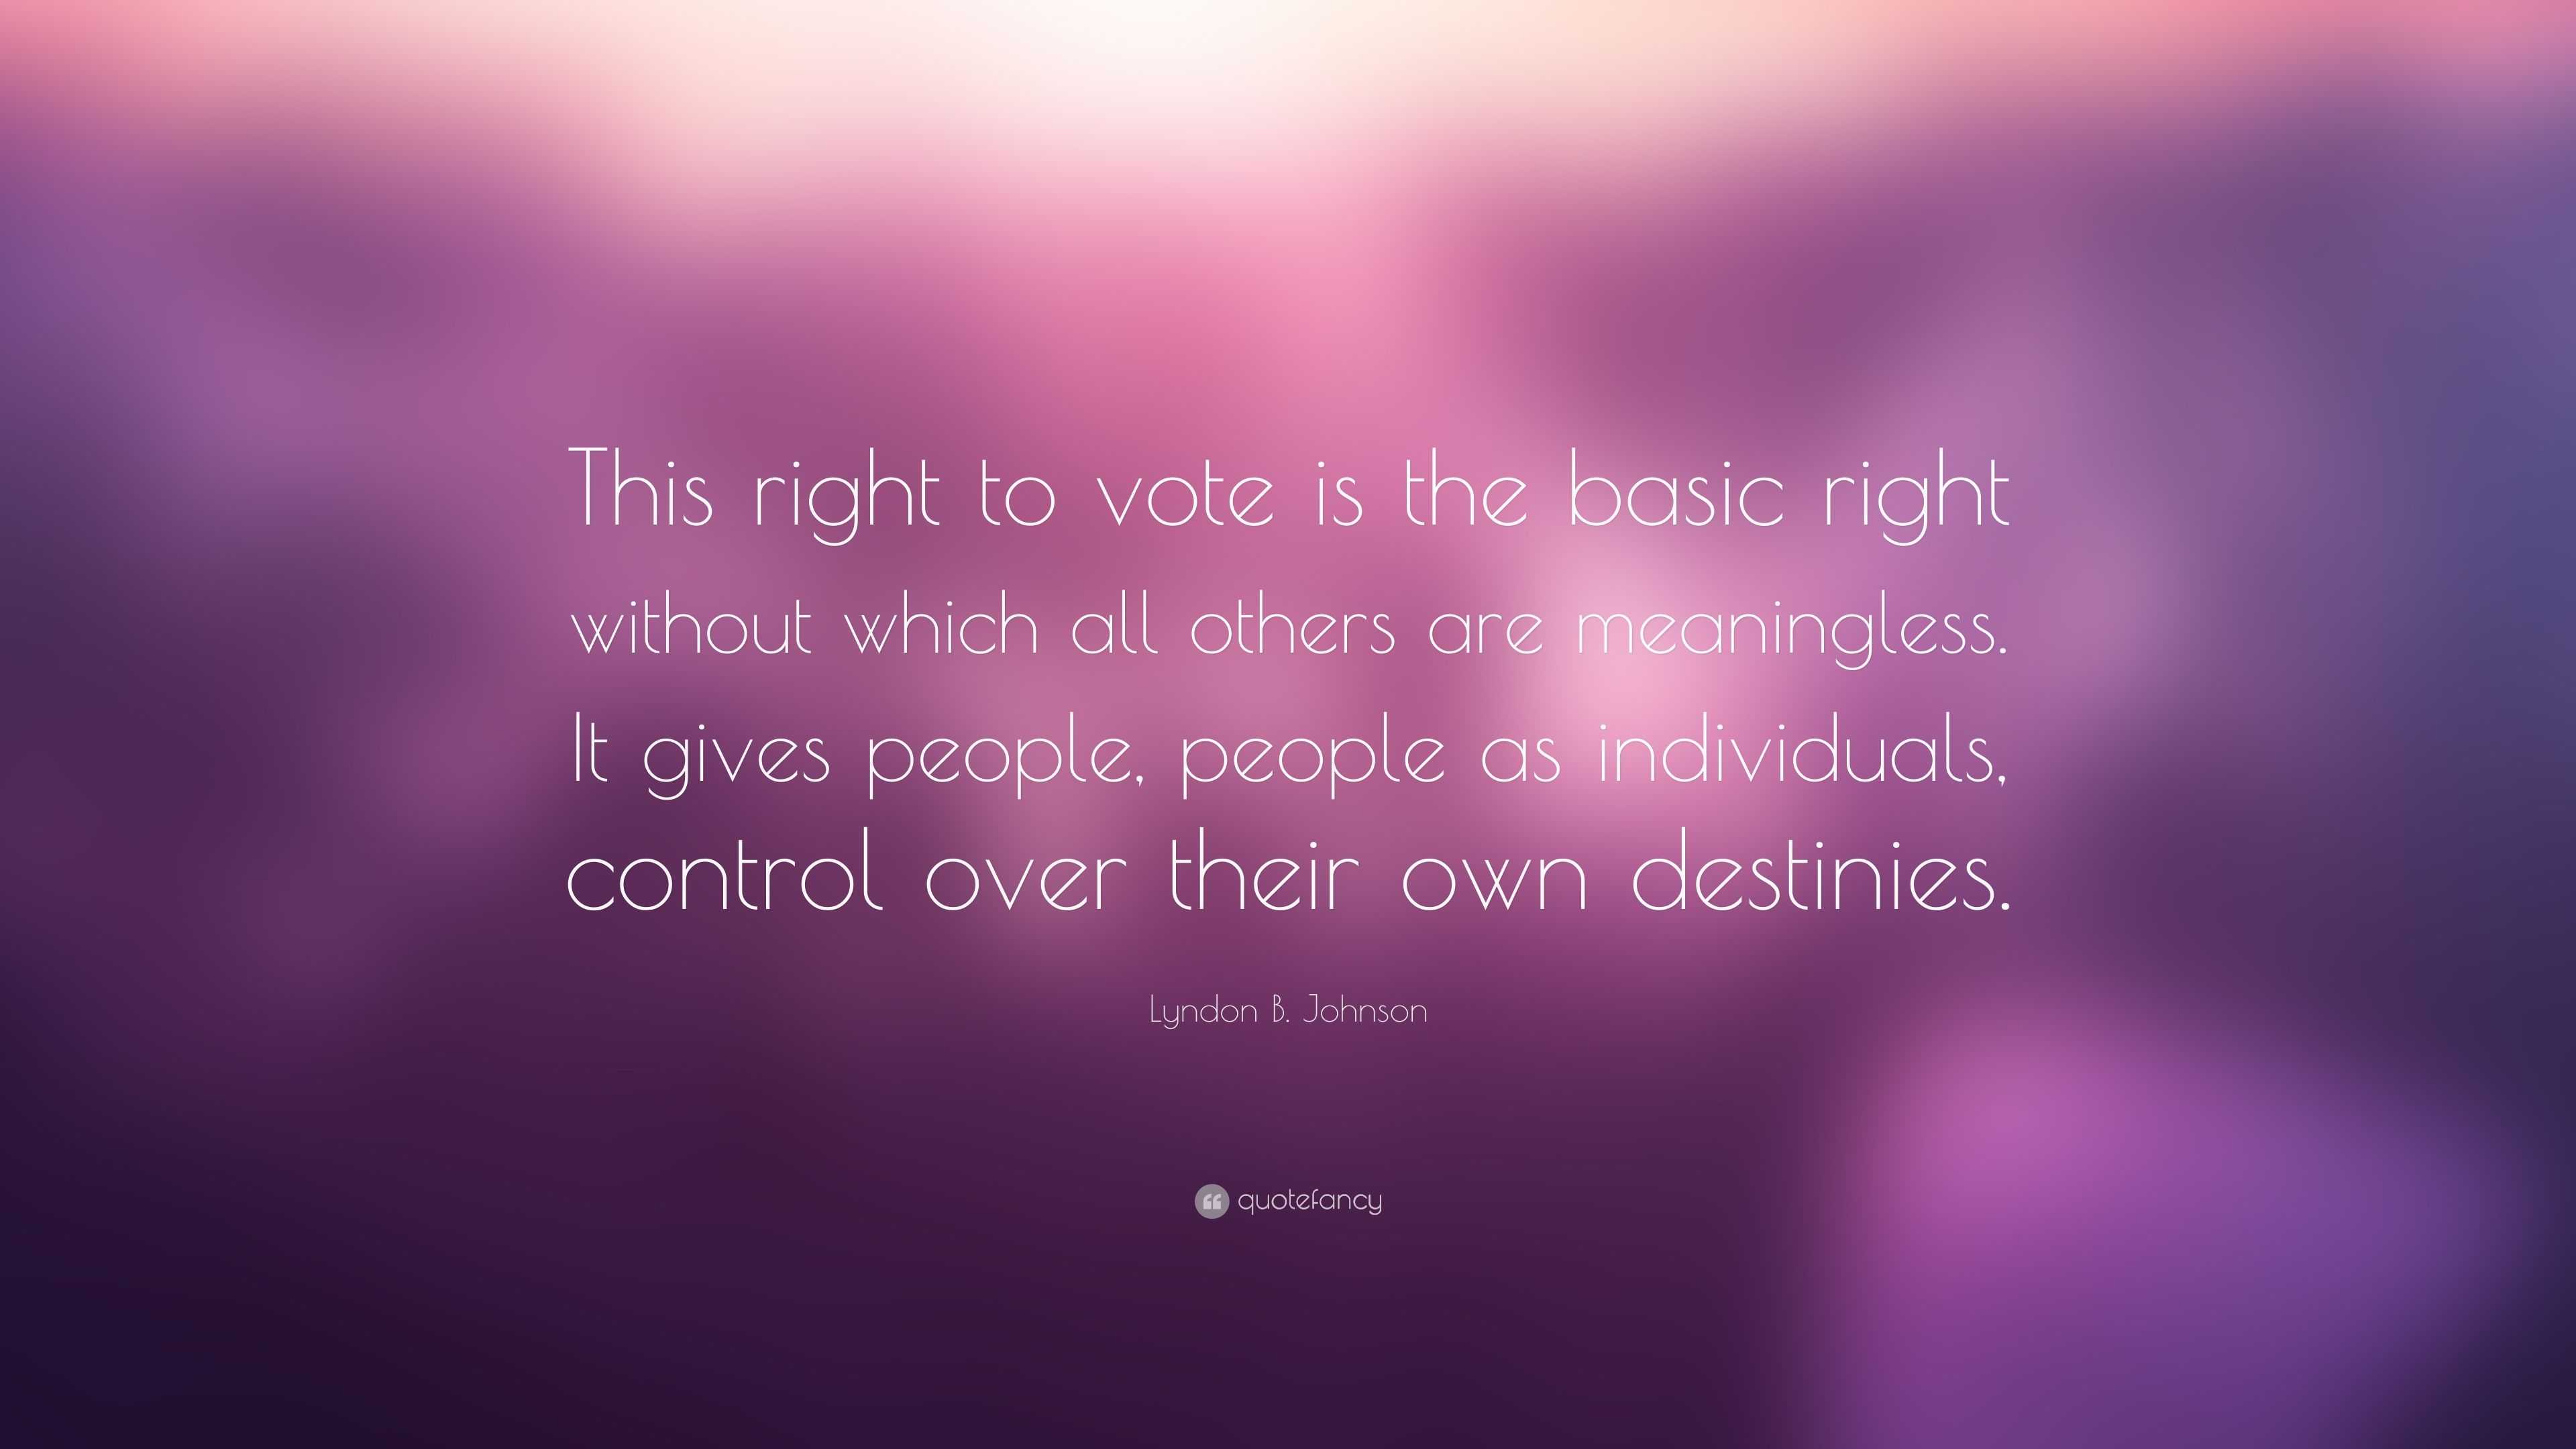 lyndon-b-johnson-quote-this-right-to-vote-is-the-basic-right-without-which-all-others-are